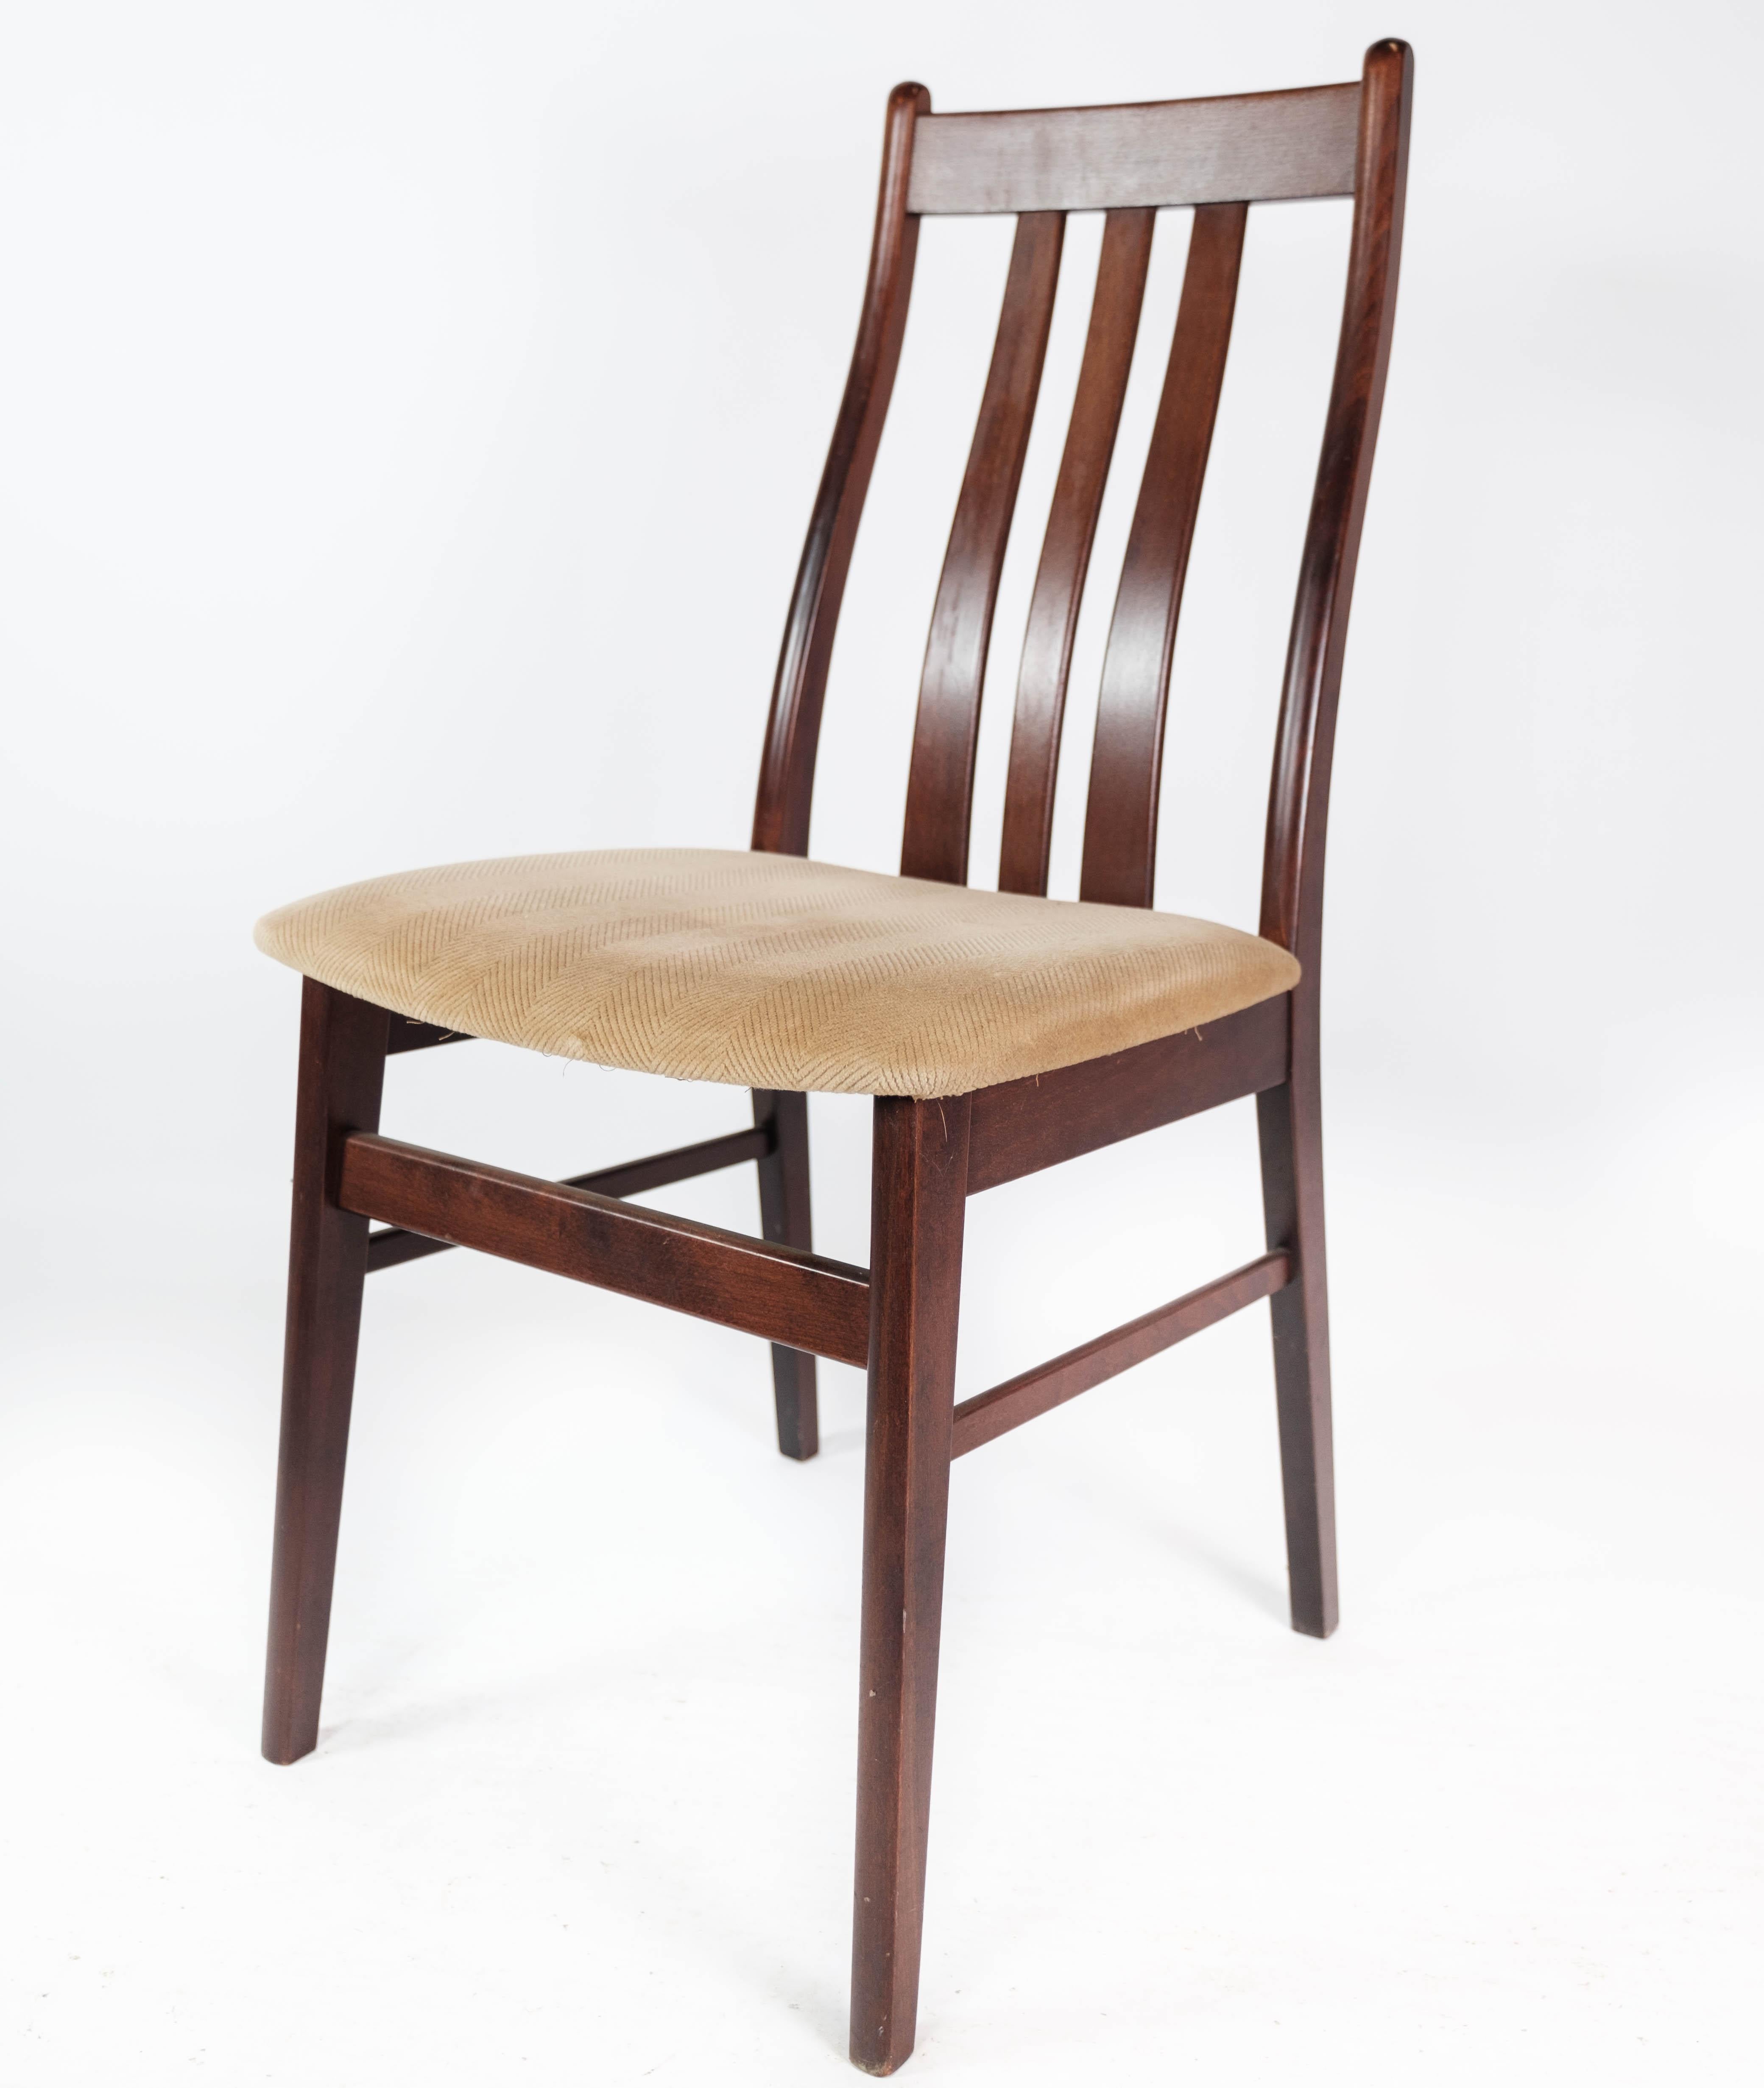 Set of Four Dining Room Chairs Made In Mahogany By Farstrup From 1960s For Sale 4